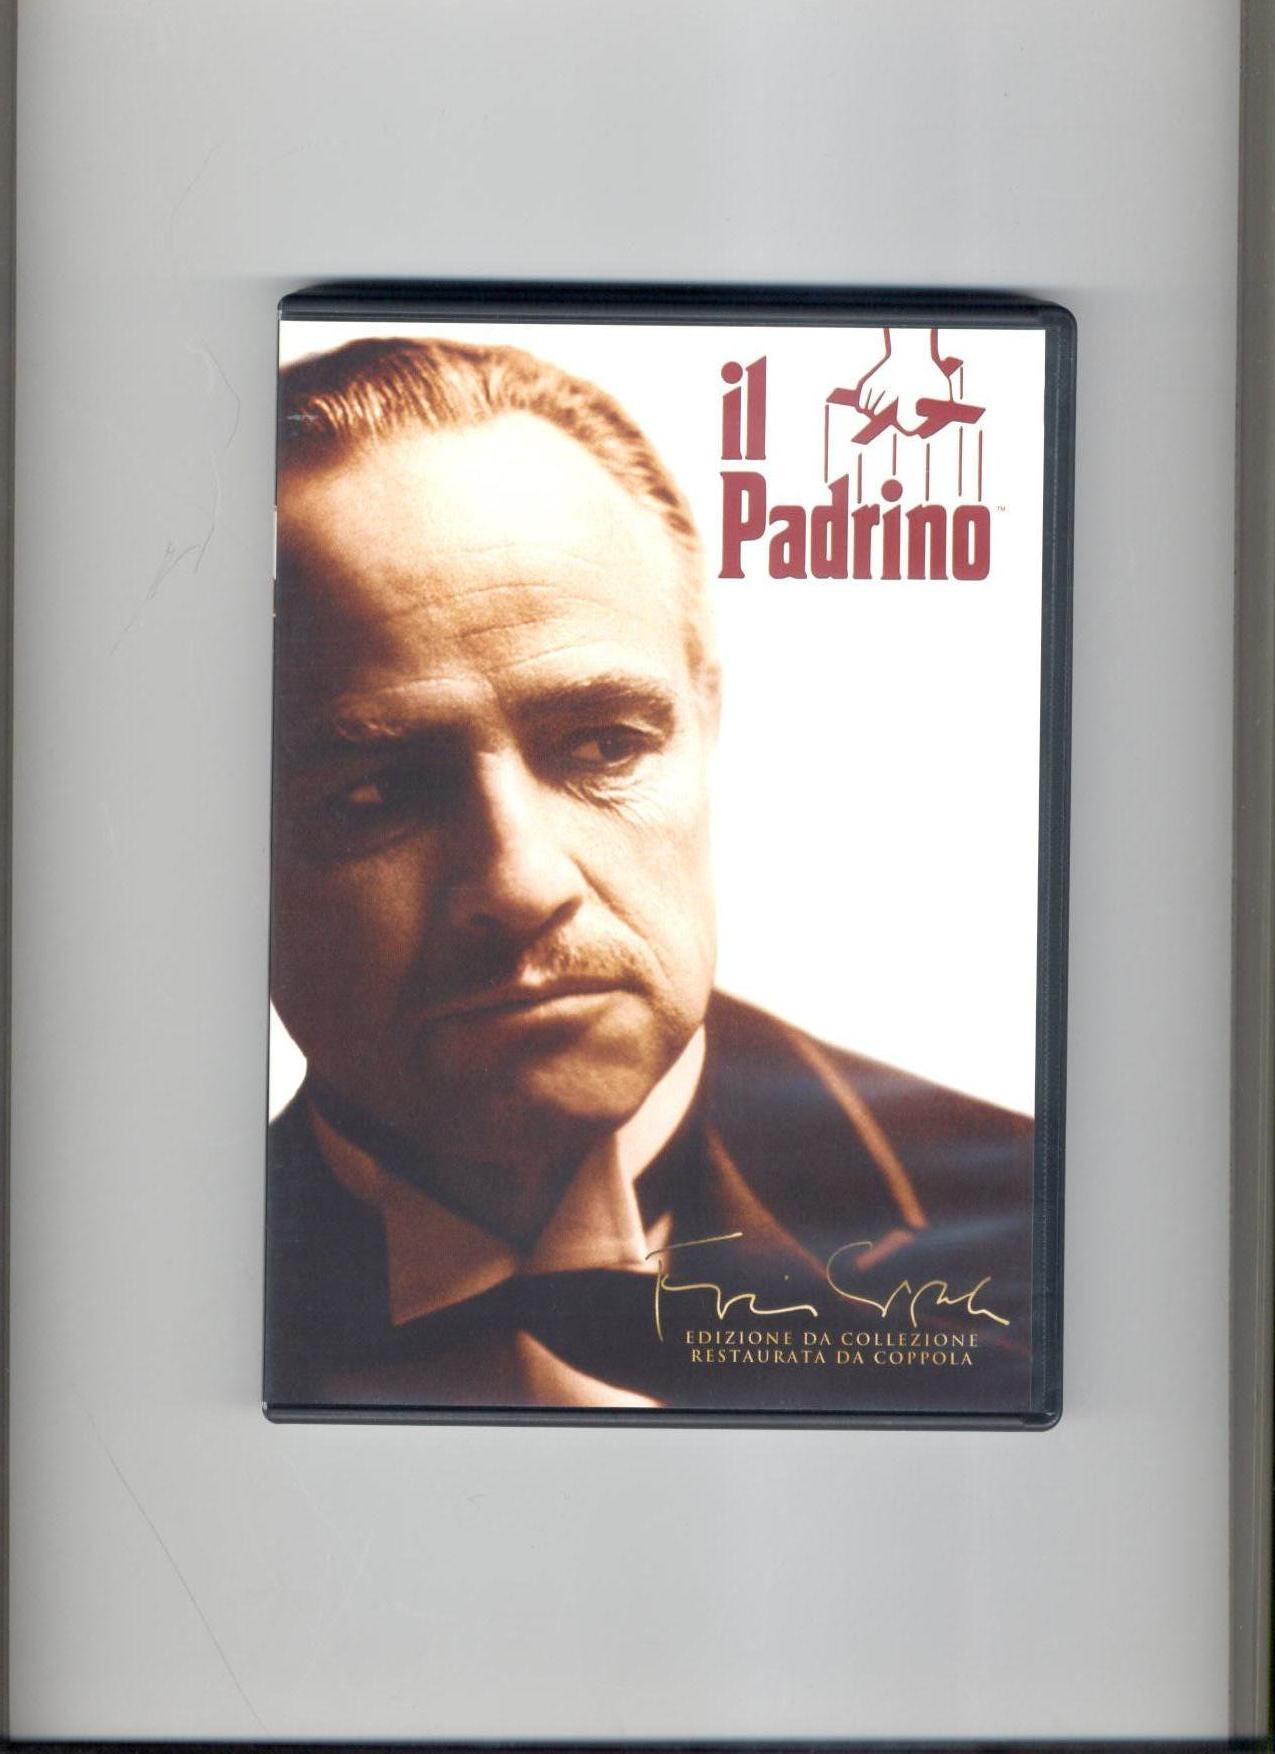 Il padrino.jpg-imported from BMW2